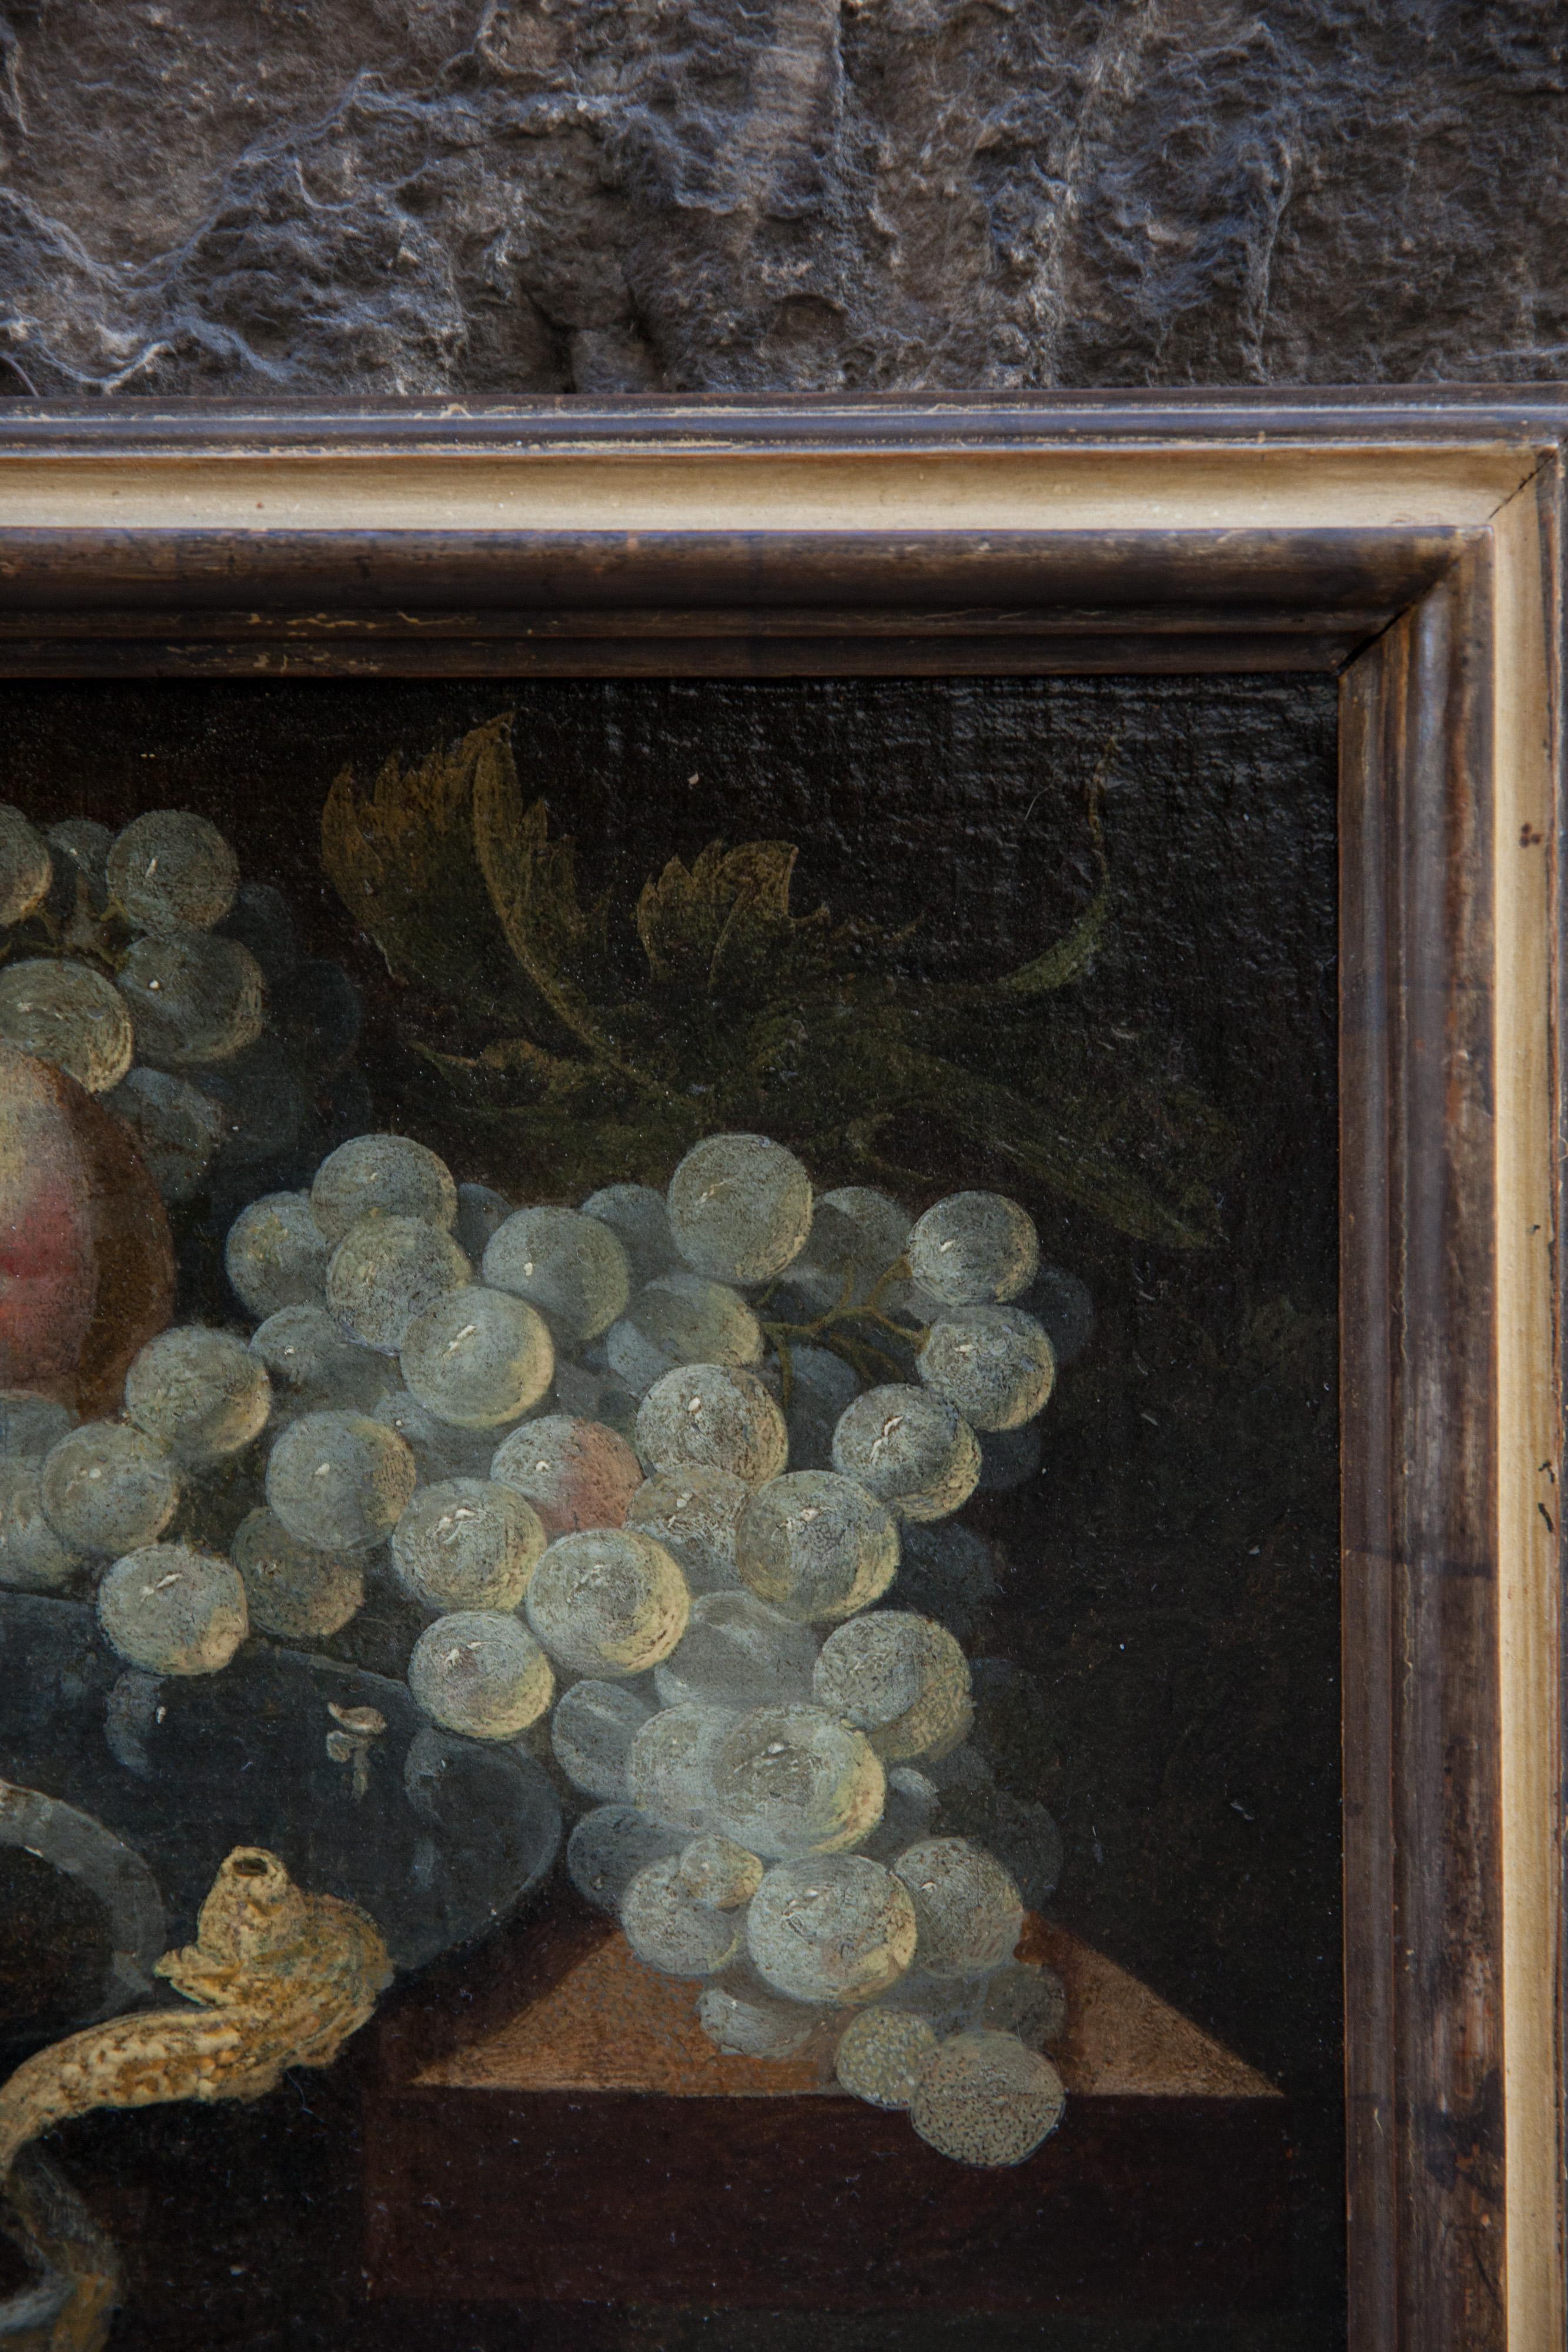 Still life of lemon upon a pewter dish, oysters, grapes, and 3 peaches.

The painting belongs to the tradition of still life painting in Antwerp.

Late XVII- early XVIII century.
Oil on canvas, applied on wooden panel.In period frames in painted and